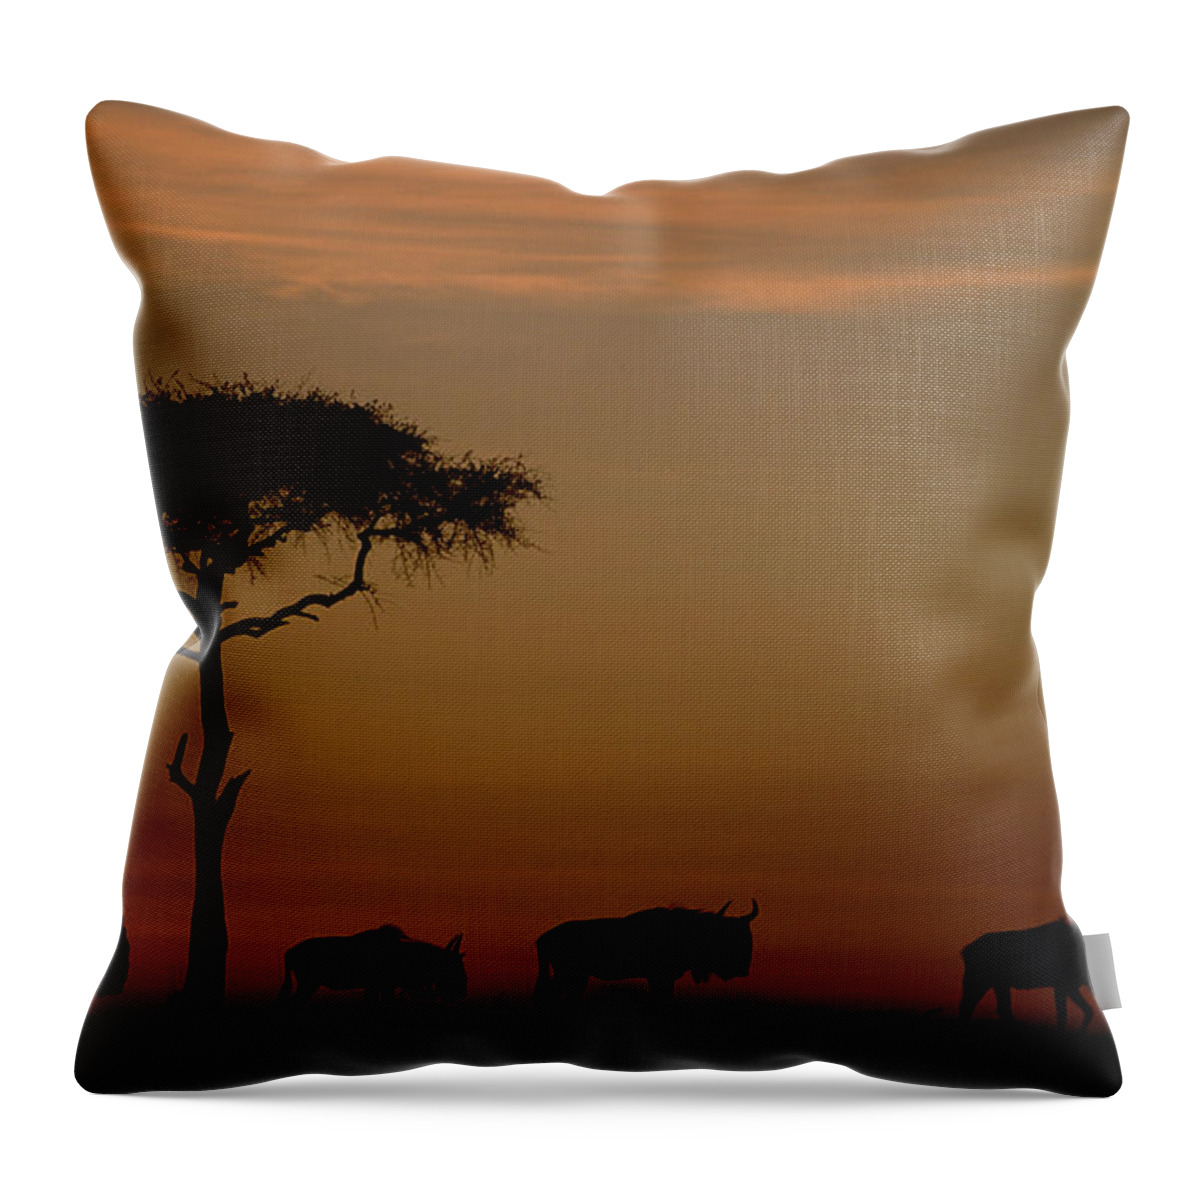 00172260 Throw Pillow featuring the photograph Blue Wildebeest Herd Migrating by Tim Fitzharris